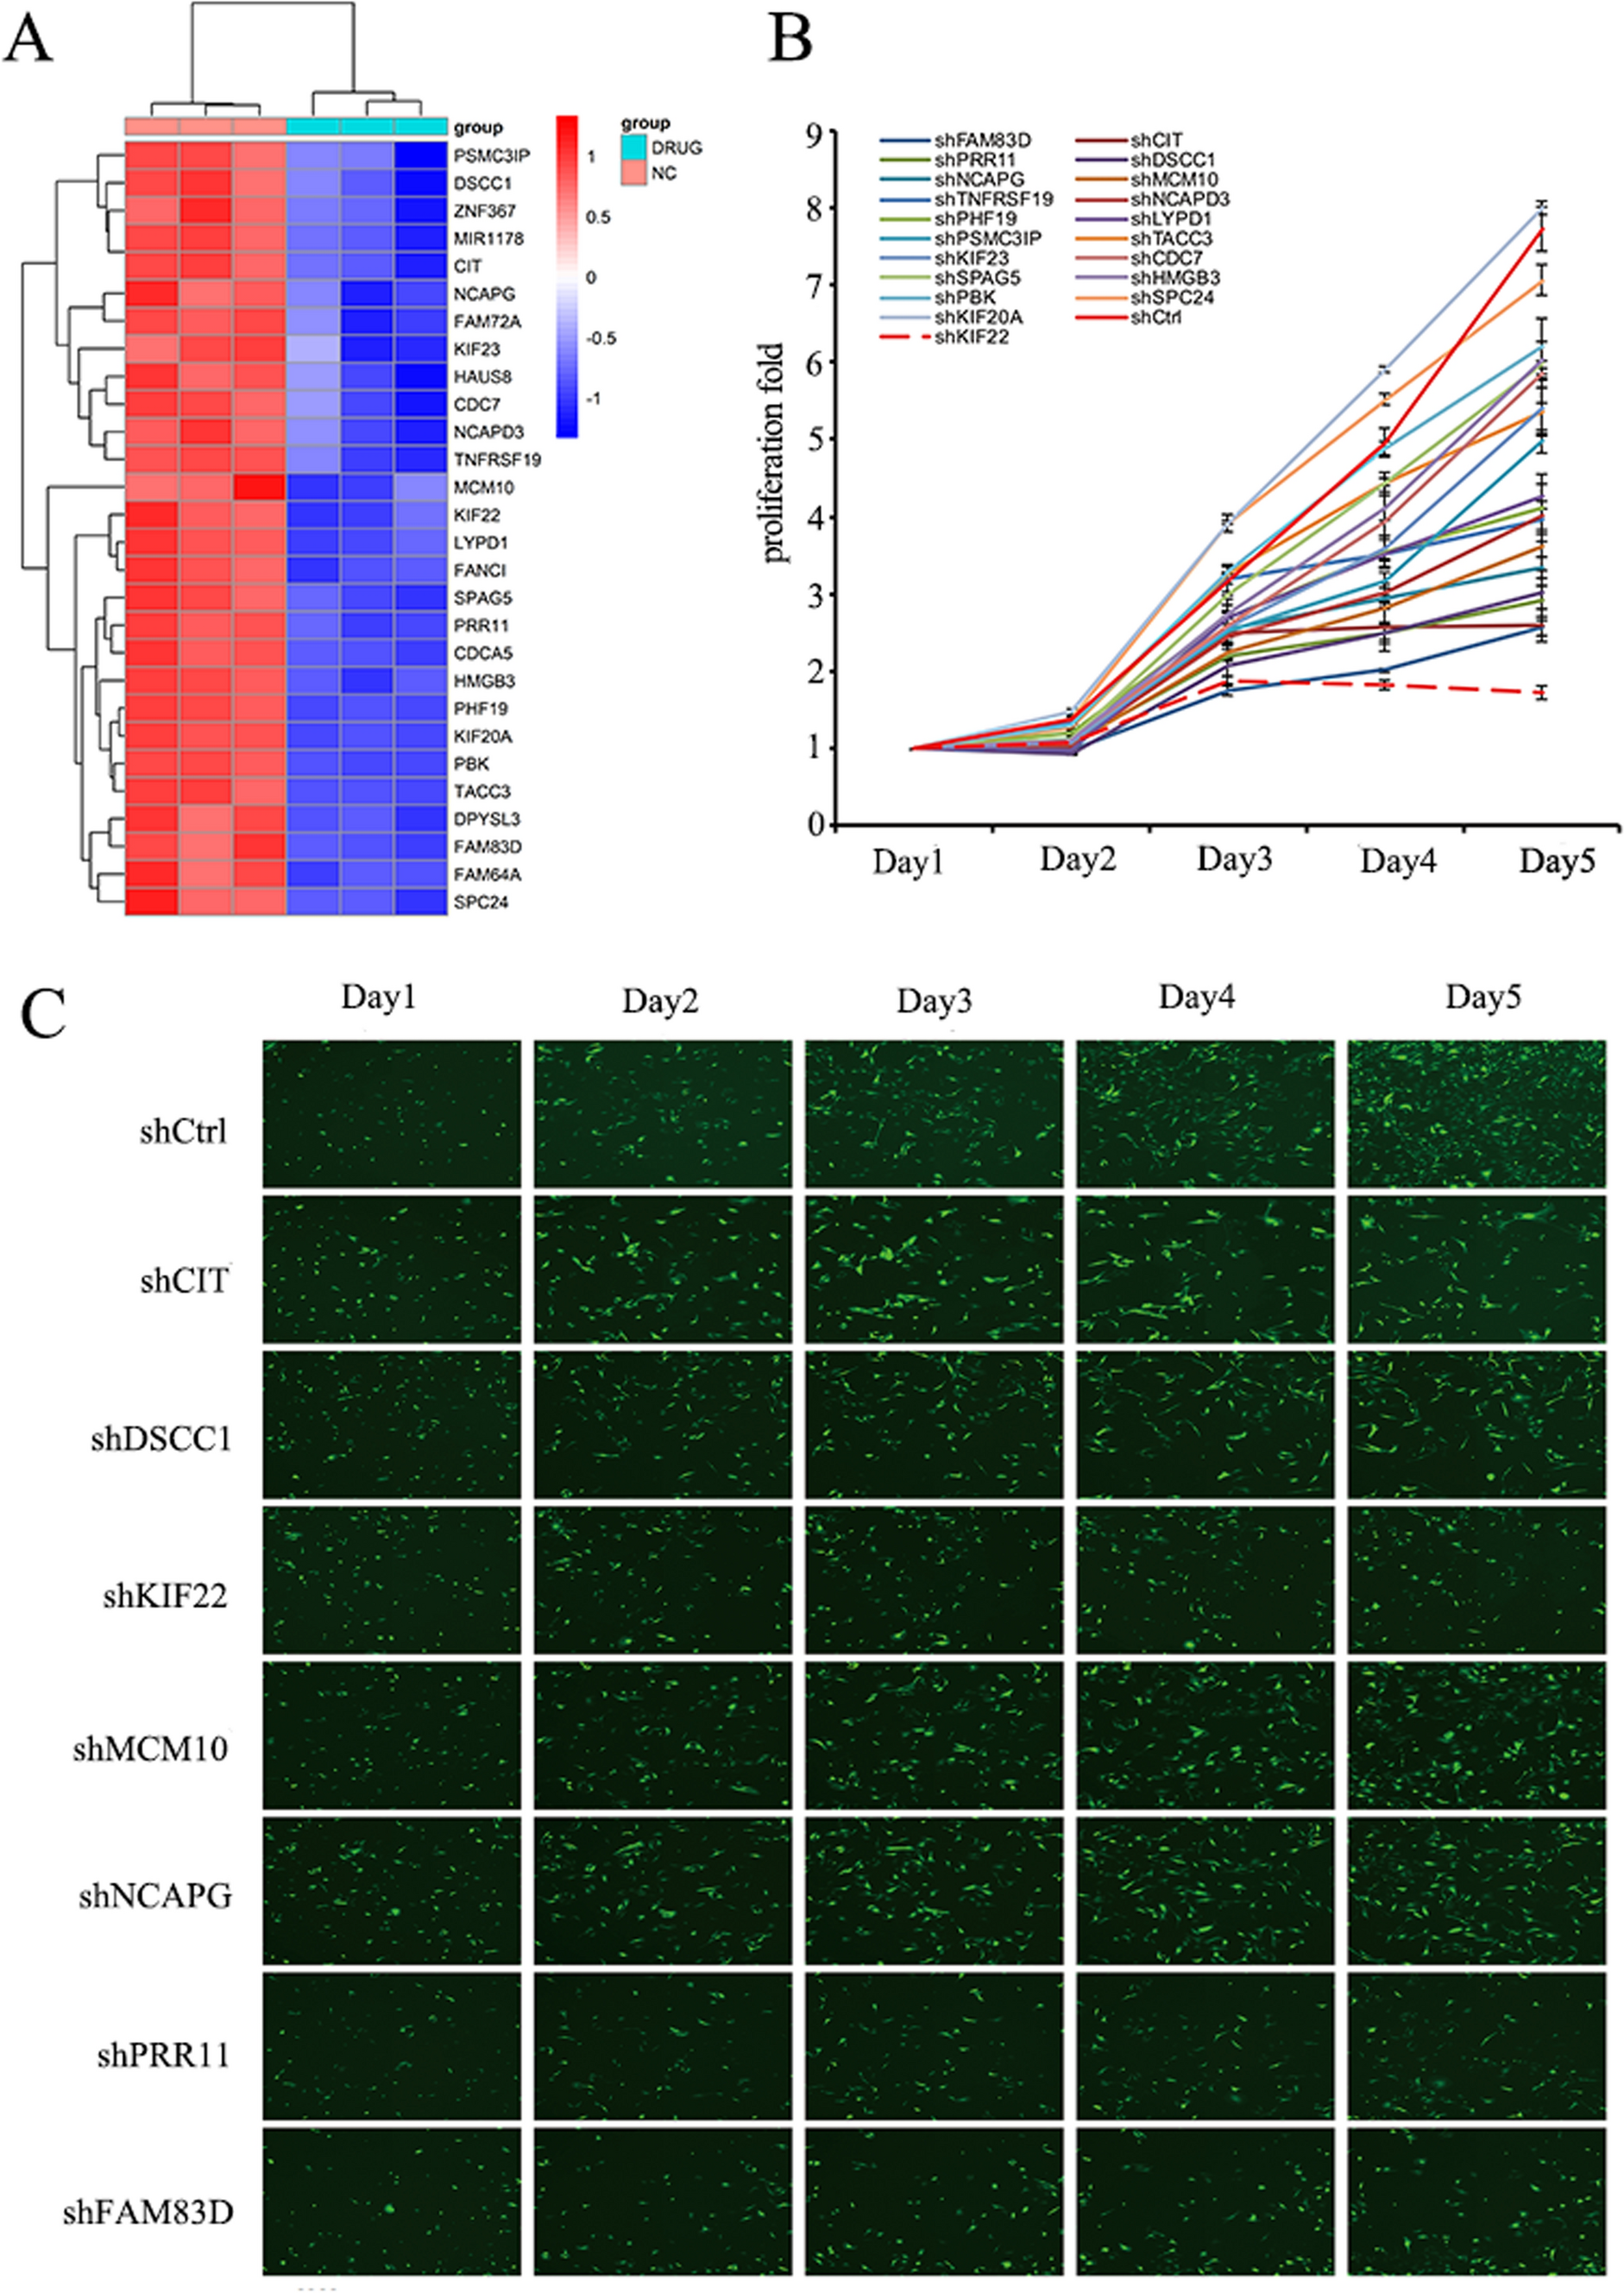 FAM83D acts as an oncogene by regulating cell cycle progression via multiple pathways in synovial sarcoma: a potential novel downstream target oncogene of anlotinib